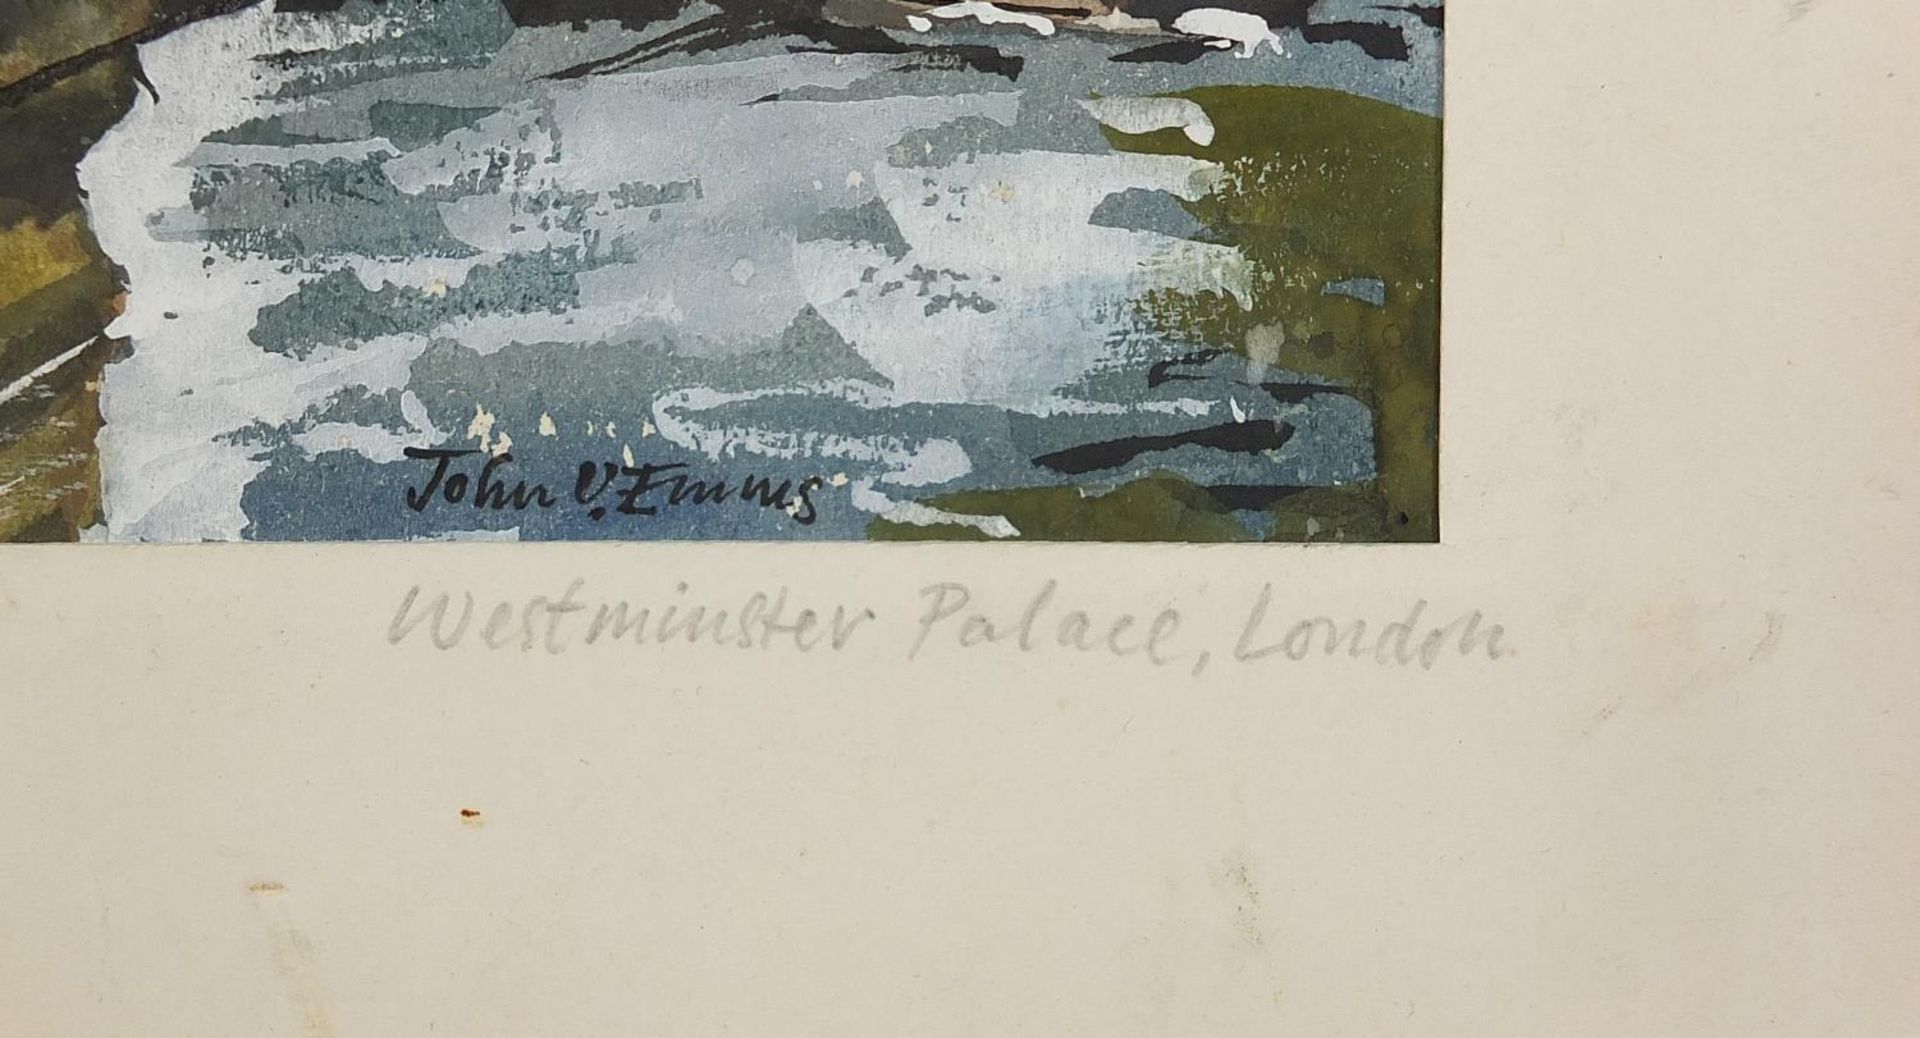 John Emms - Westminster Palace London, watercolour, mounted, unframed, 16cm x 11cm : For further - Image 5 of 8